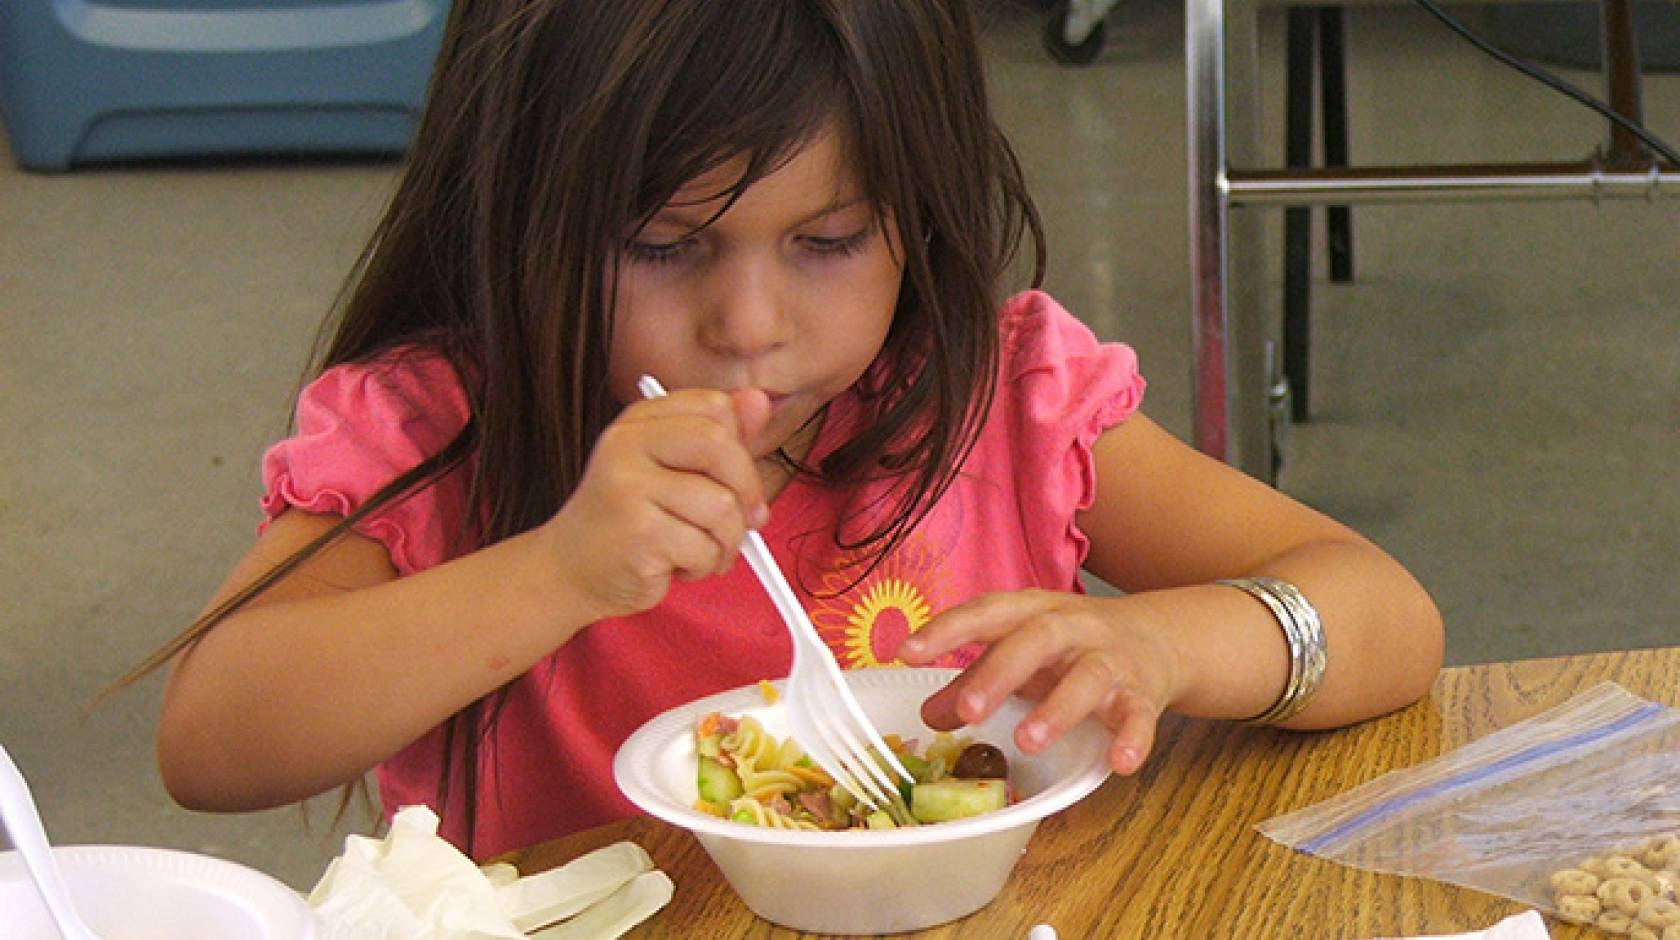 UC researchers found that half of WIC kids had eaten green vegetables the previous day, in contrast to only one in five non-WIC children. 